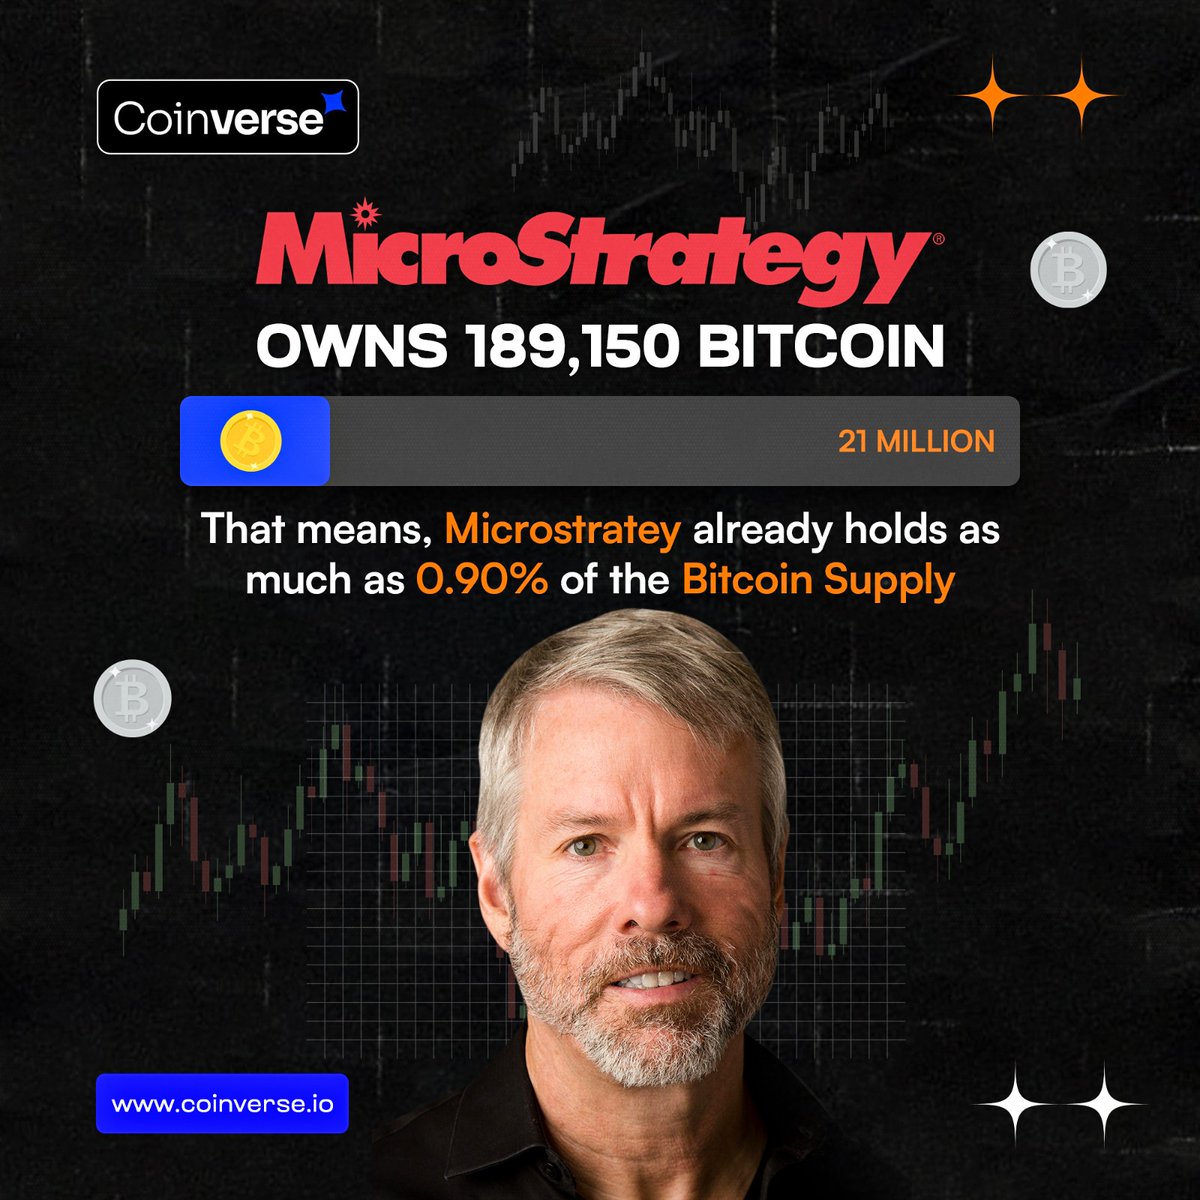 Does #MicroStrategy own too much Bitcoin? They now have 189,150 Bitcoin

That means, MicroStrategy already holds as much as 0.90% of the #Bitcoin Supply

#MicroStrategyBitcoin #BitcoinOwnership #CryptoInvestment #BitcoinSupply #DigitalAssetStrategy #CryptoPortfolio